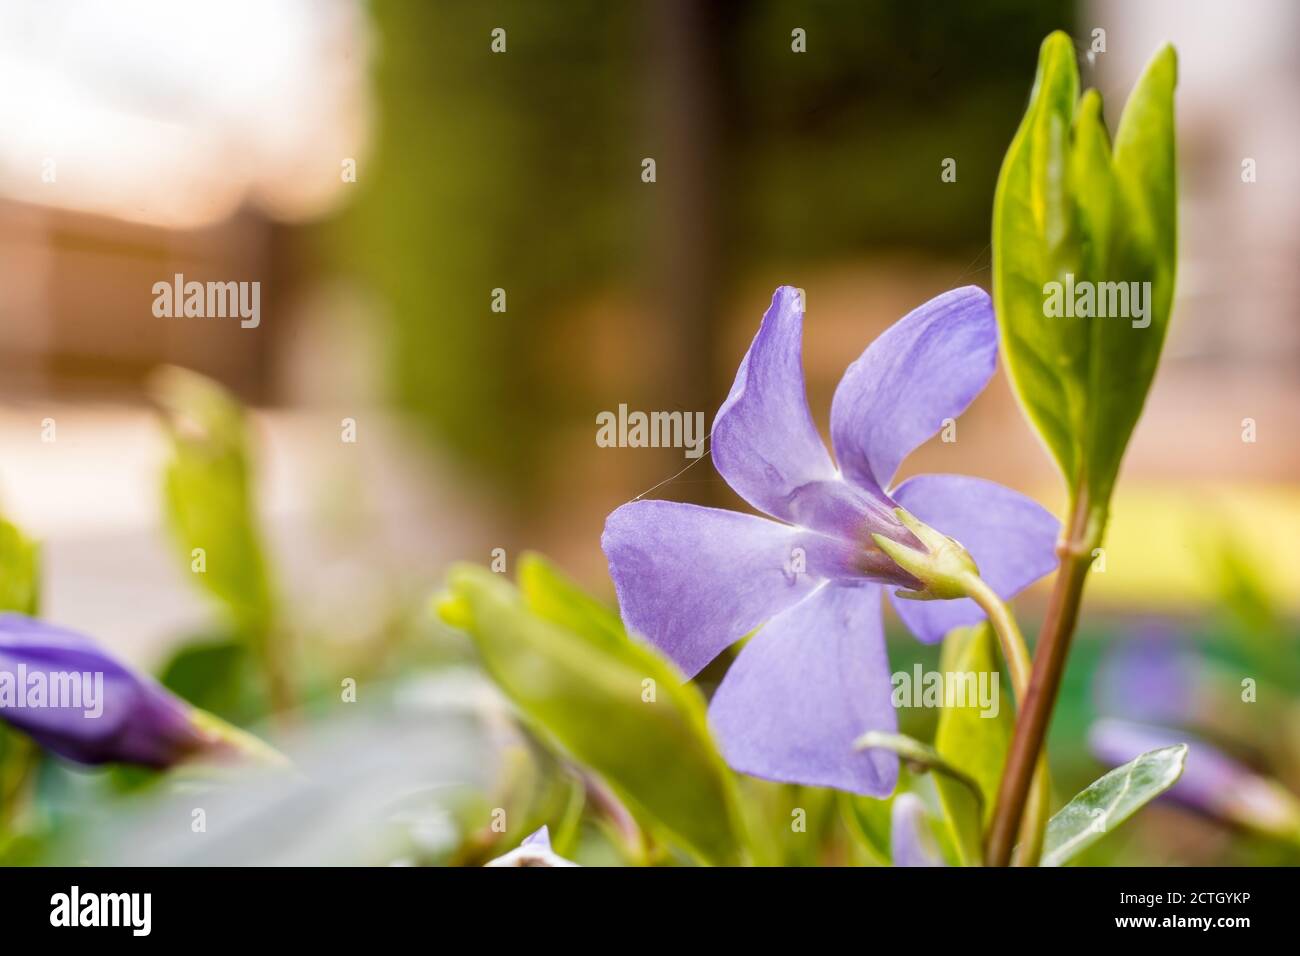 Lilac flower in detail with natural background Stock Photo